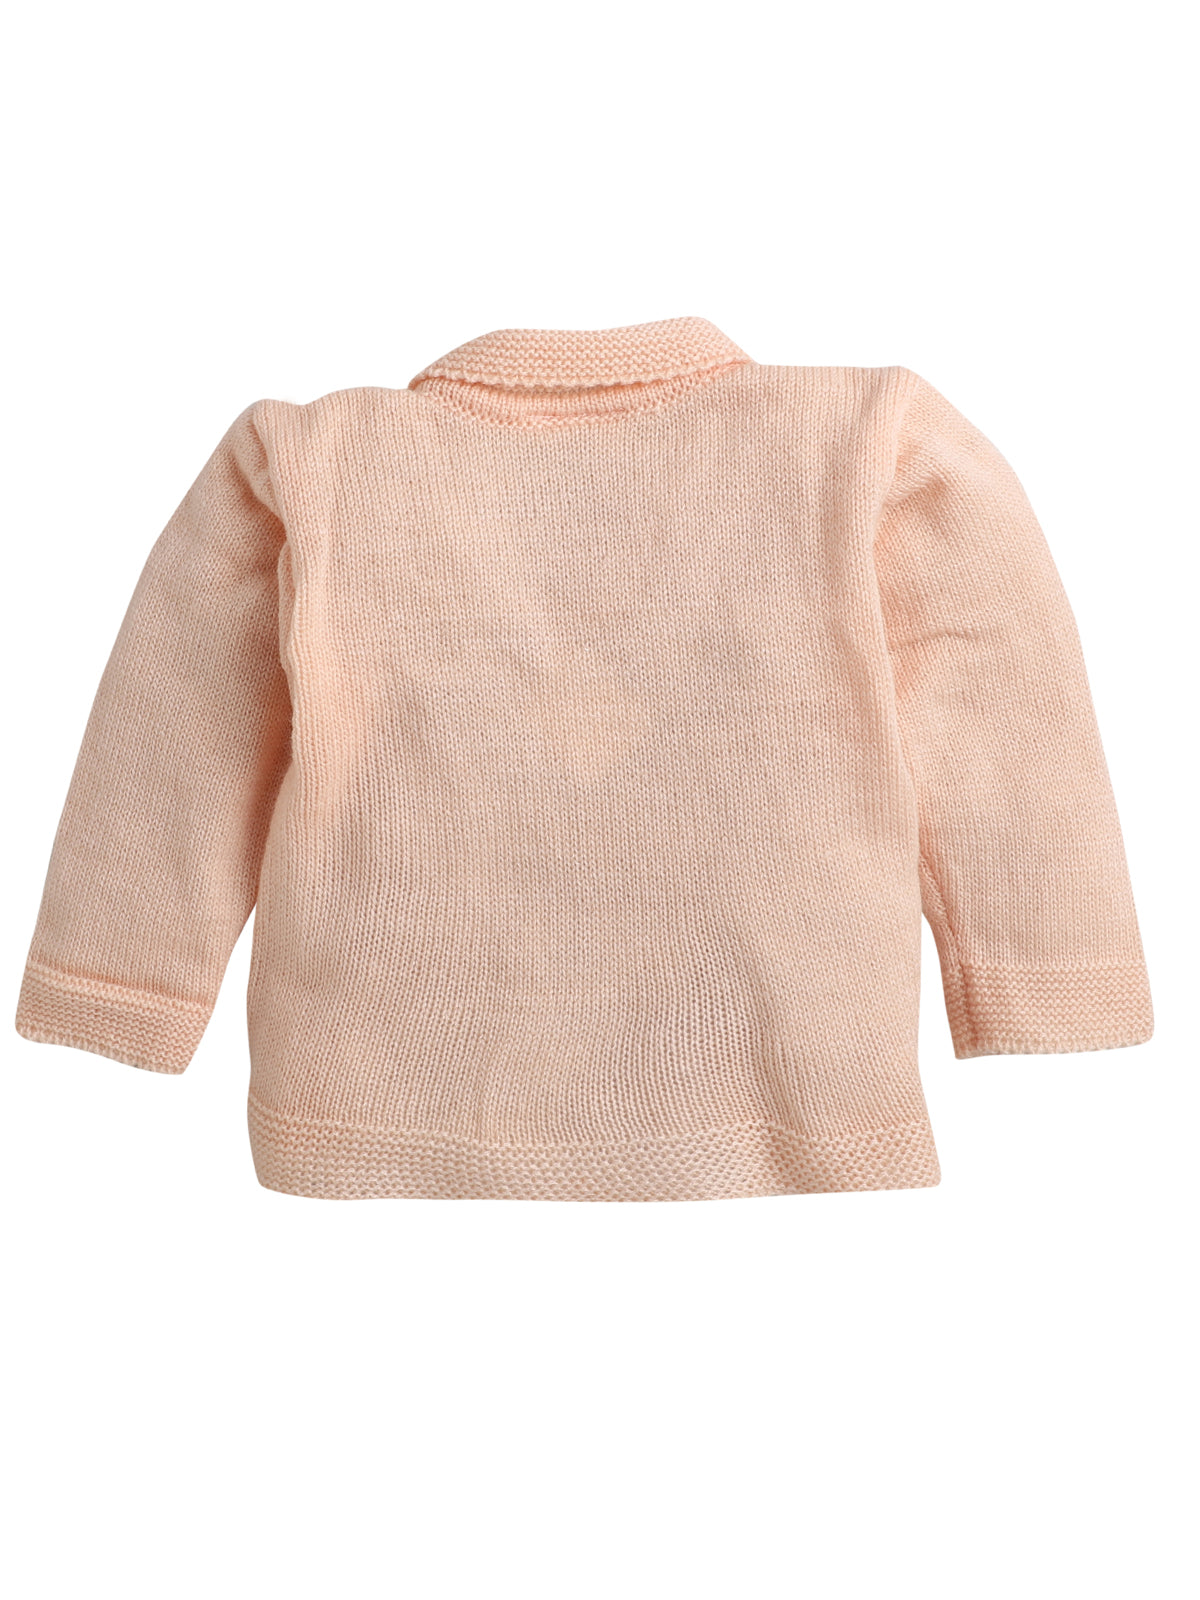 Front Open Full Sleeve Peach Color Sweater with matching Caps and Socks